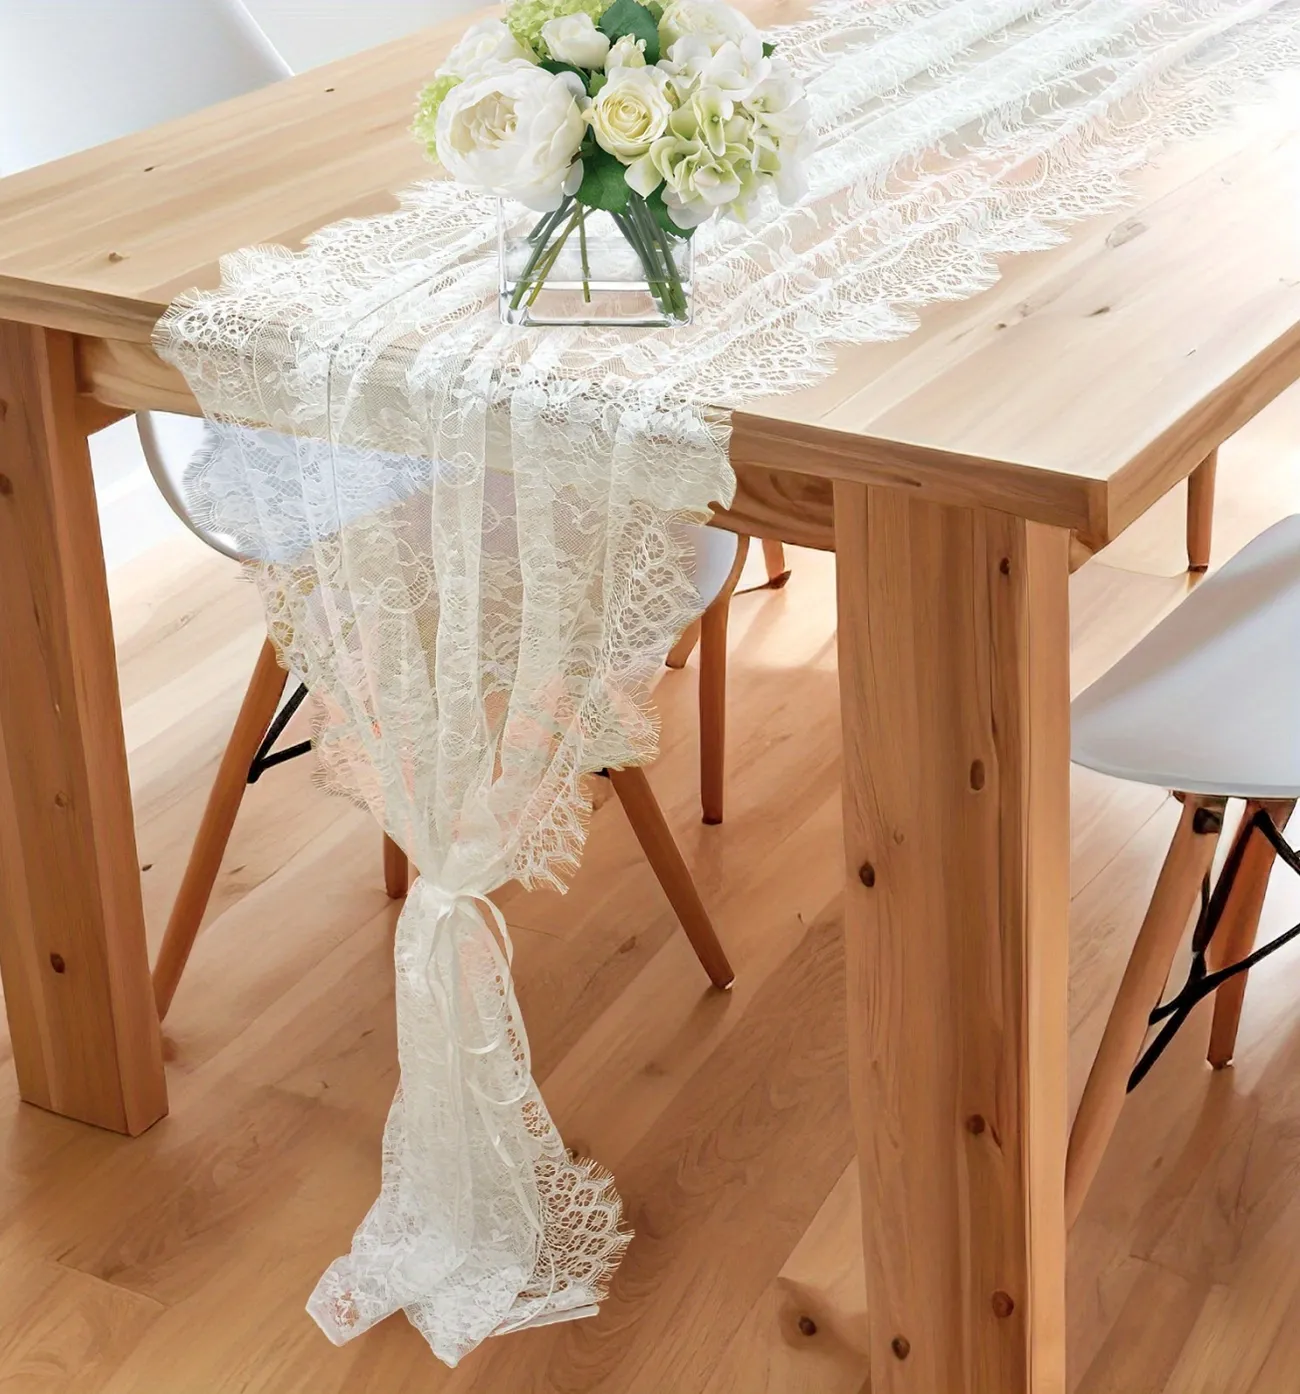 1pcs, Lace Table Runner Modern Table Runners With 59.06inch Ribbon White  Floral Lace Table Runners For Rustic Chic Wedding Reception Table Decor,  Boho